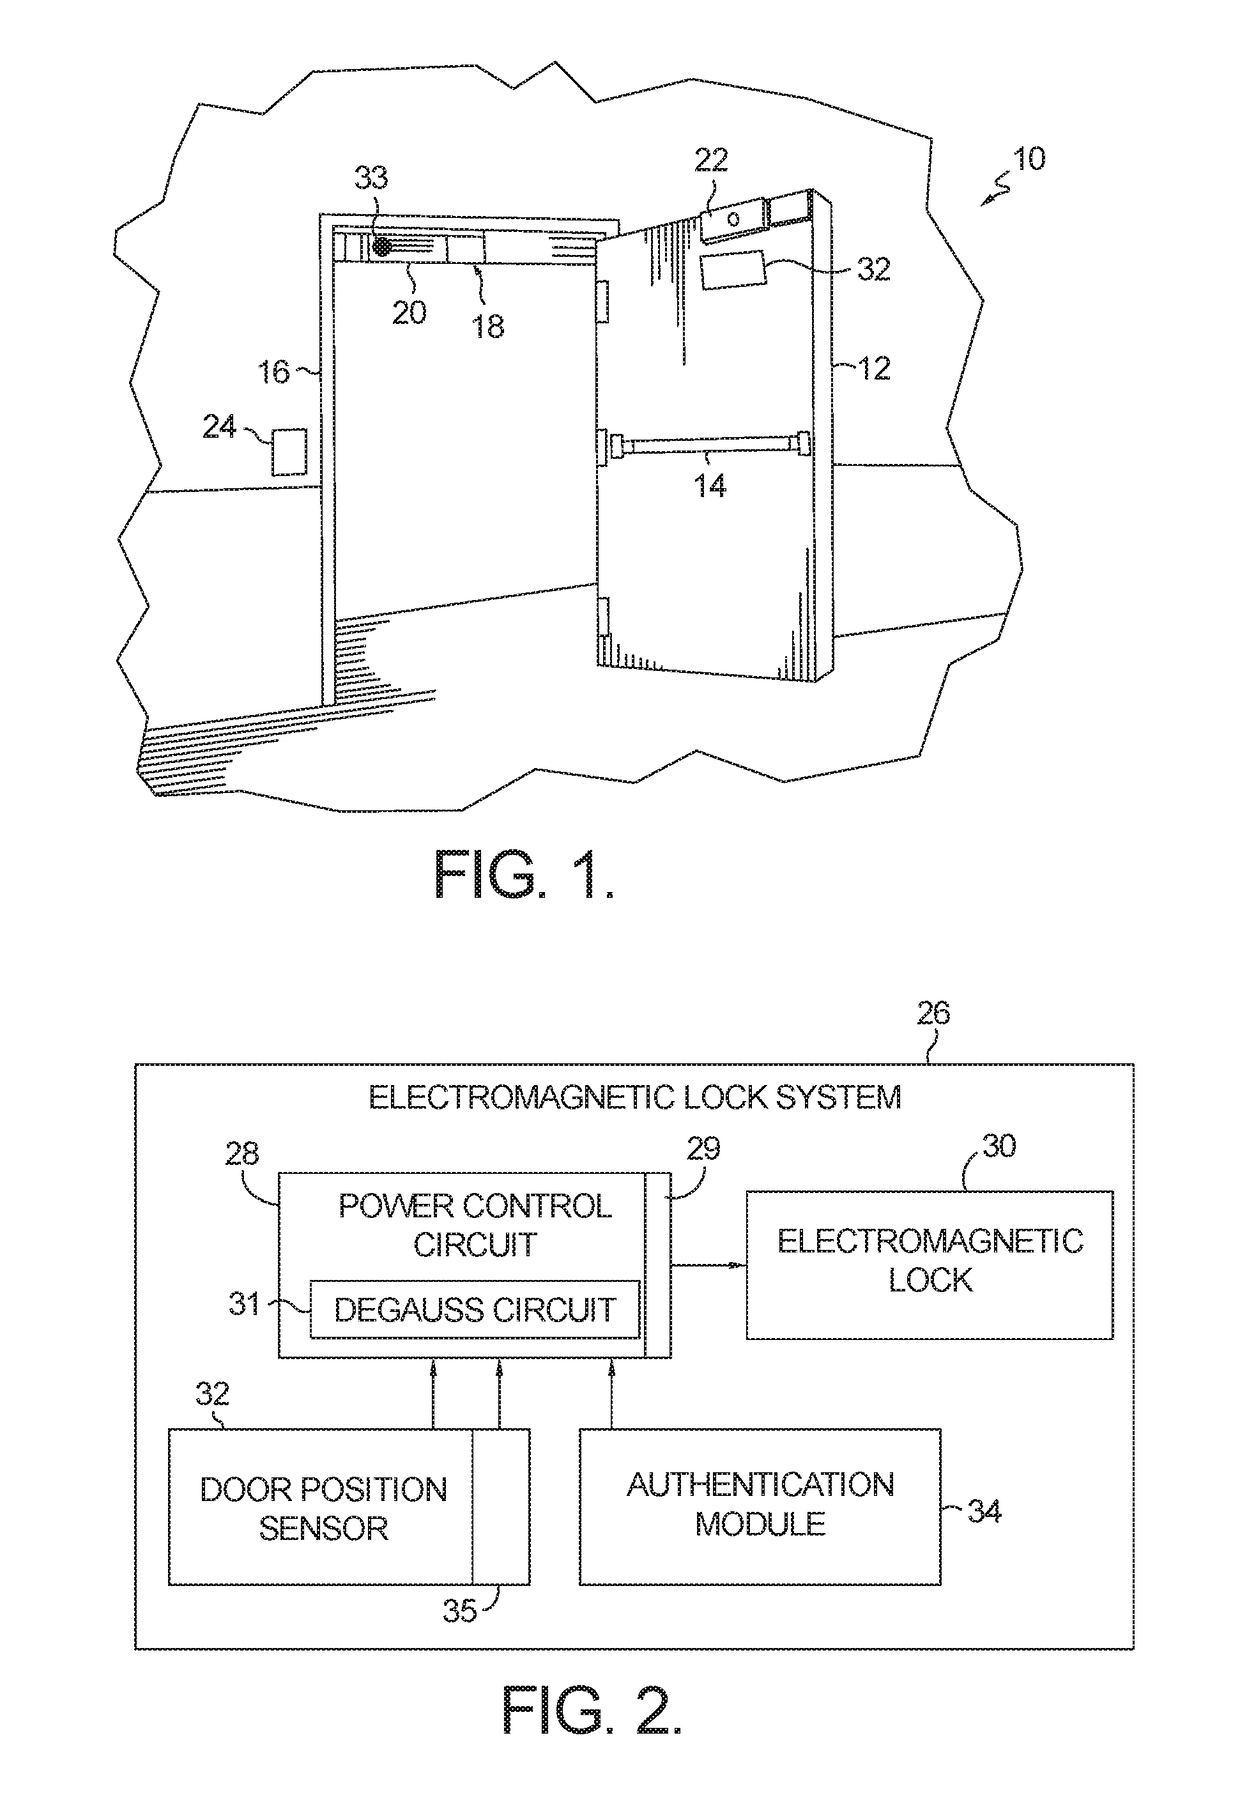 Degauss circuit for use in an electronically actuated door lock